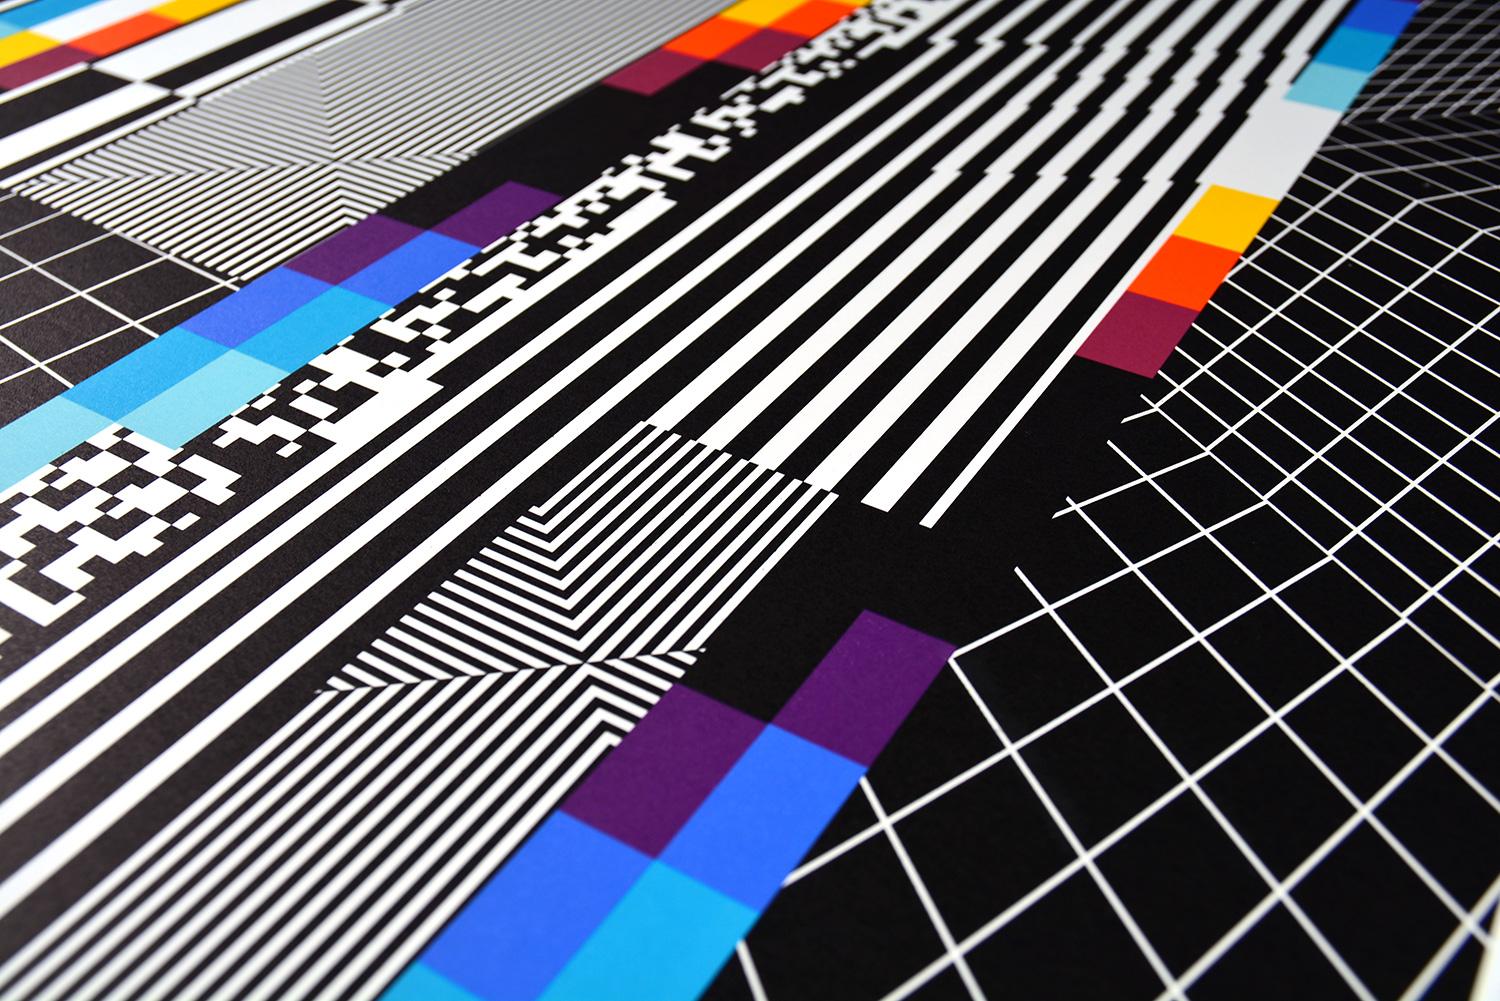 Felipe Pantone CHROMADYNA MICAP #4
Date of creation: 2020
Medium: Lithograph on paper
Edition number: 24/30
Size: 75.5 x 55.5 cm
Condition: New, in mint condition and never framed
Lithograph on paper hand signed and numbered on the back by the